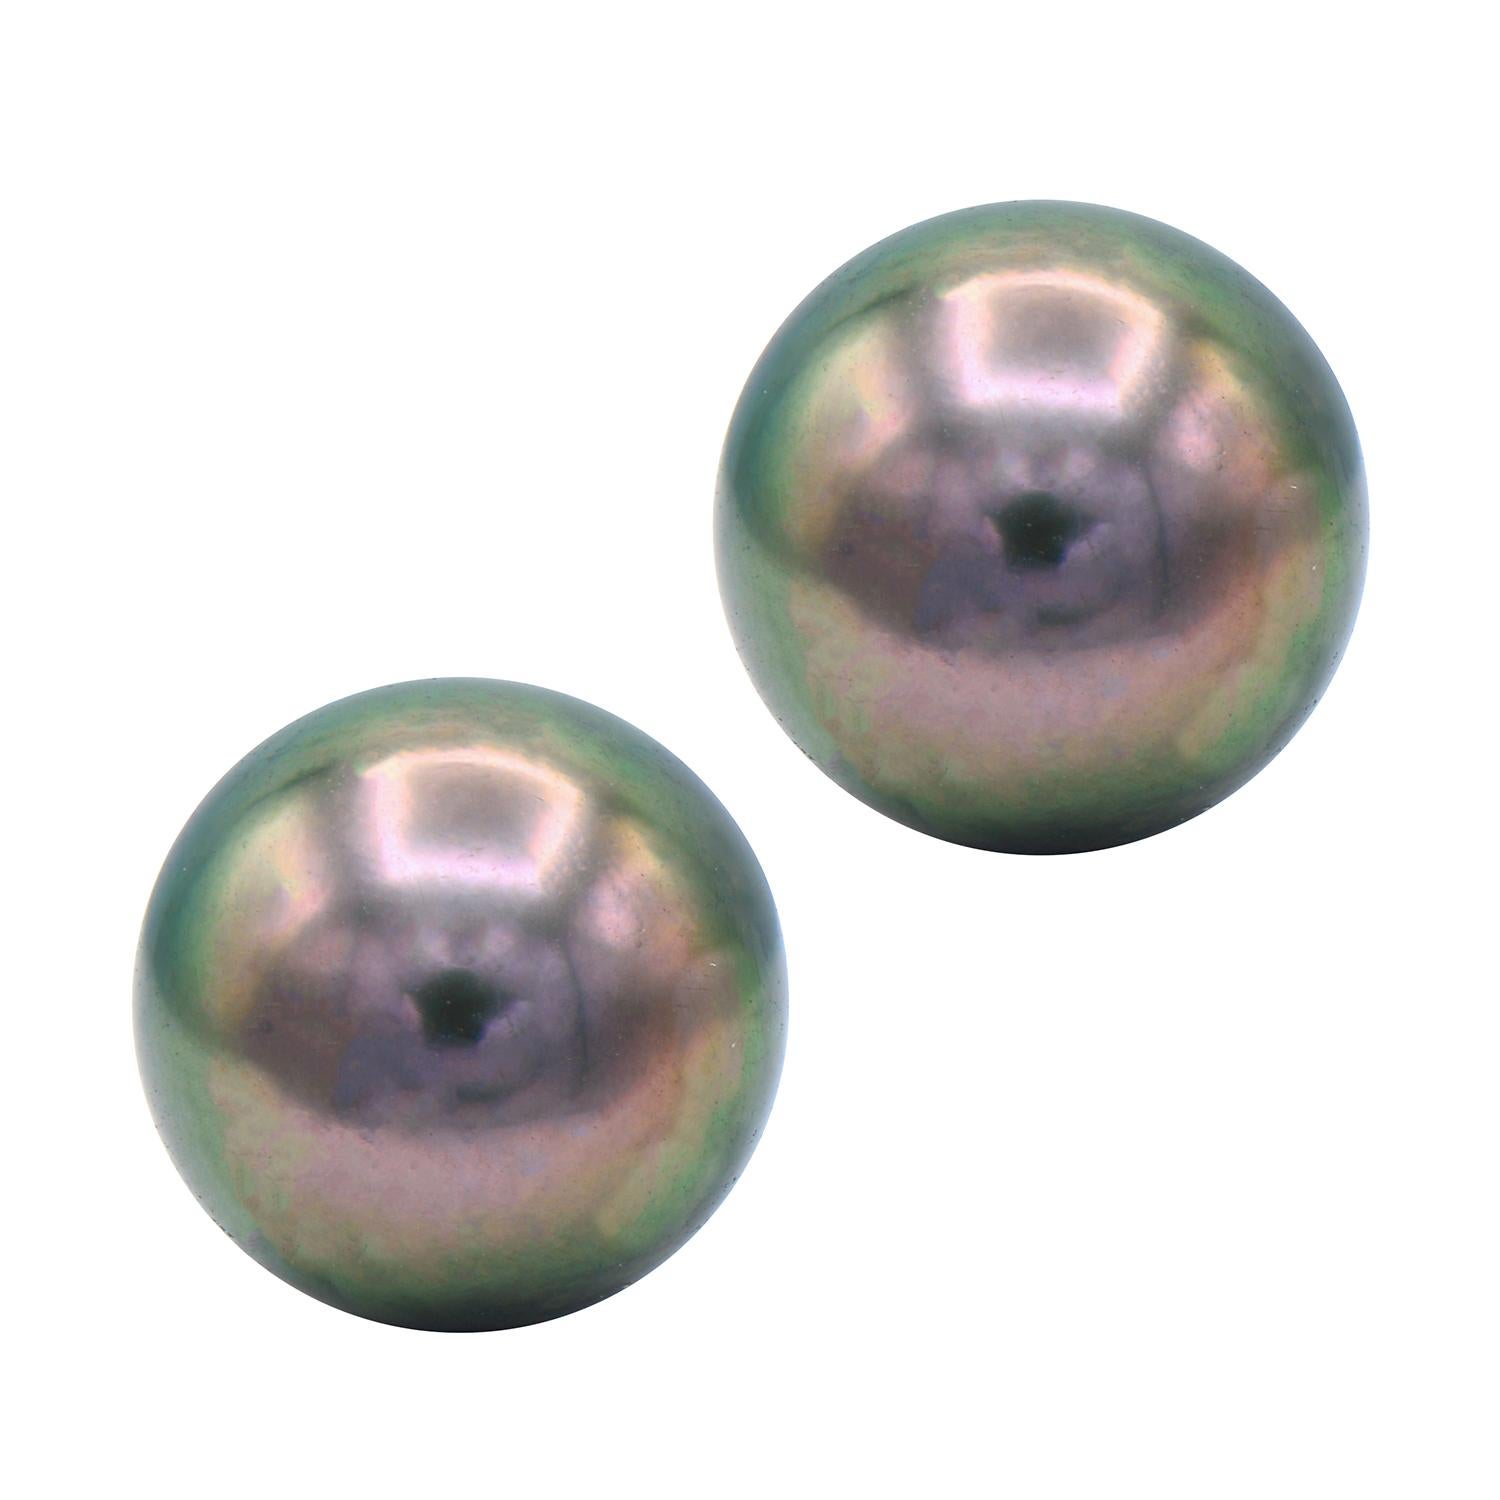 Tahitian Pearl Studs give a little twist to the classic white pearl studs. The Tahitian Pearl Studs are expertly matched in color, luster, and size to make a perfect pair. These 8-8.5mm beautiful pearls are set in 14 karat white gold.